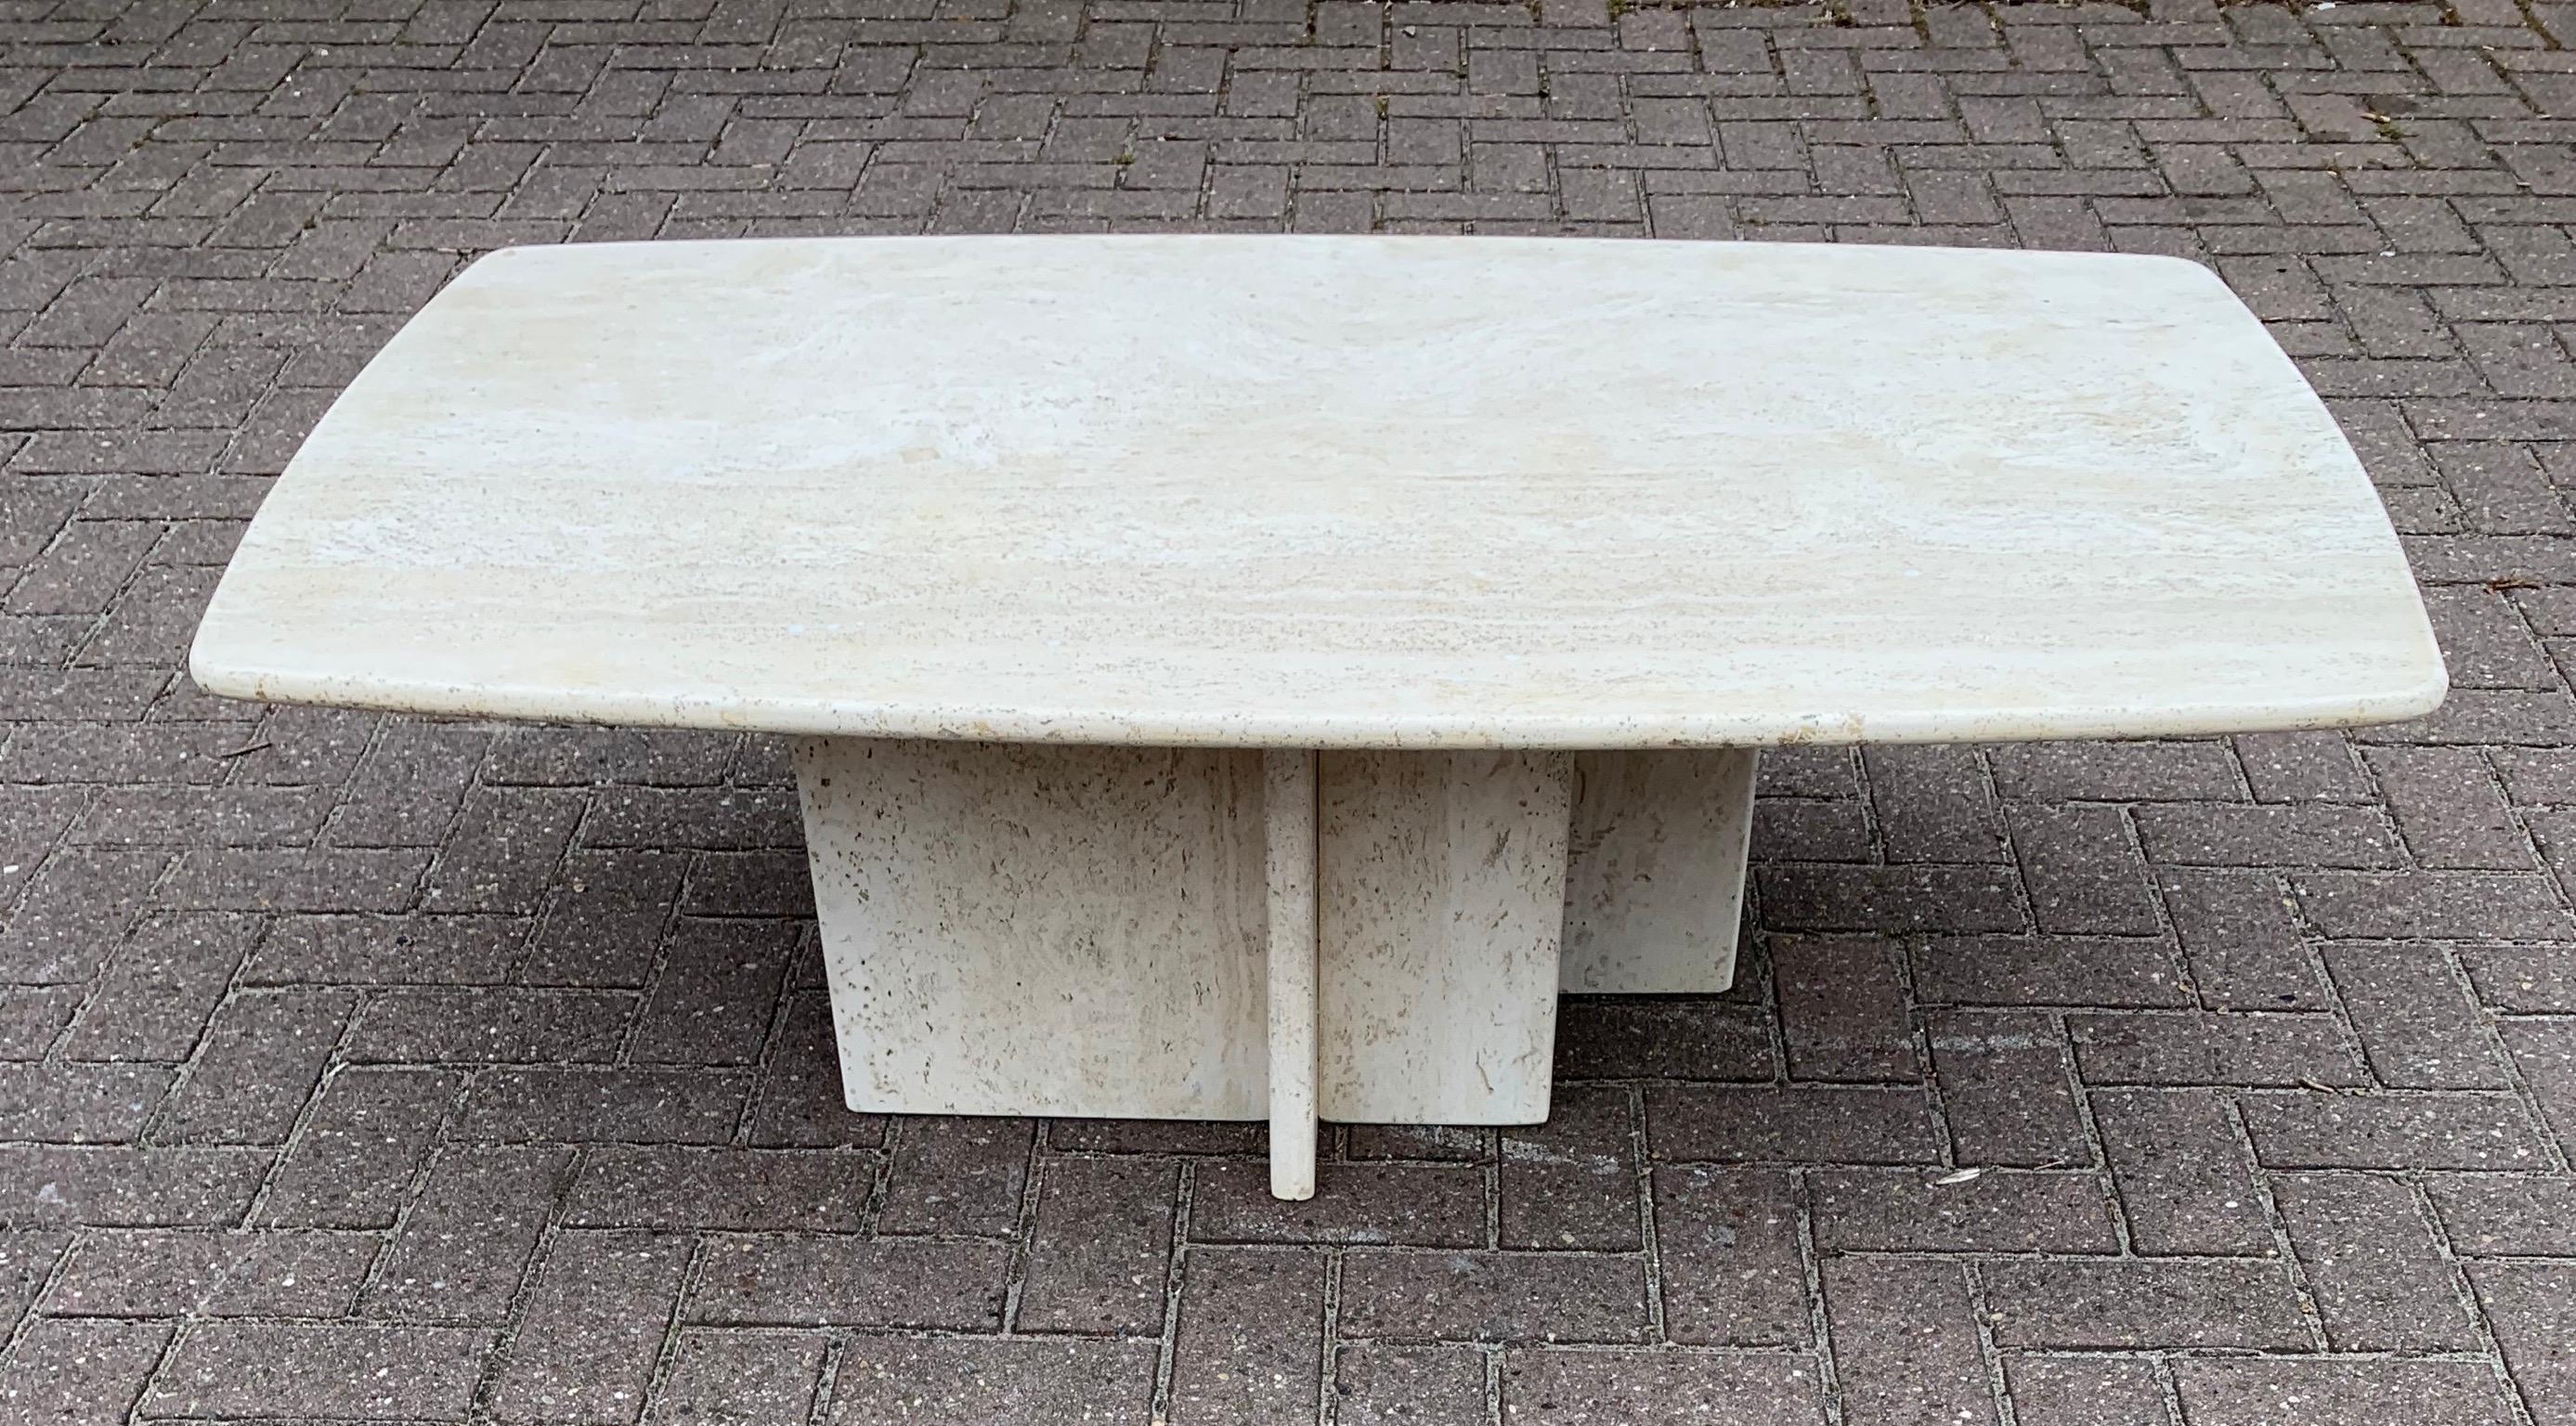 Stylish and functional Italian, hardstone table. 

This large size travertine table with rounded sides and an attractive, asymmetrical base is in good to excellent condition. Because of the timeless design this hardstone table can be used in all